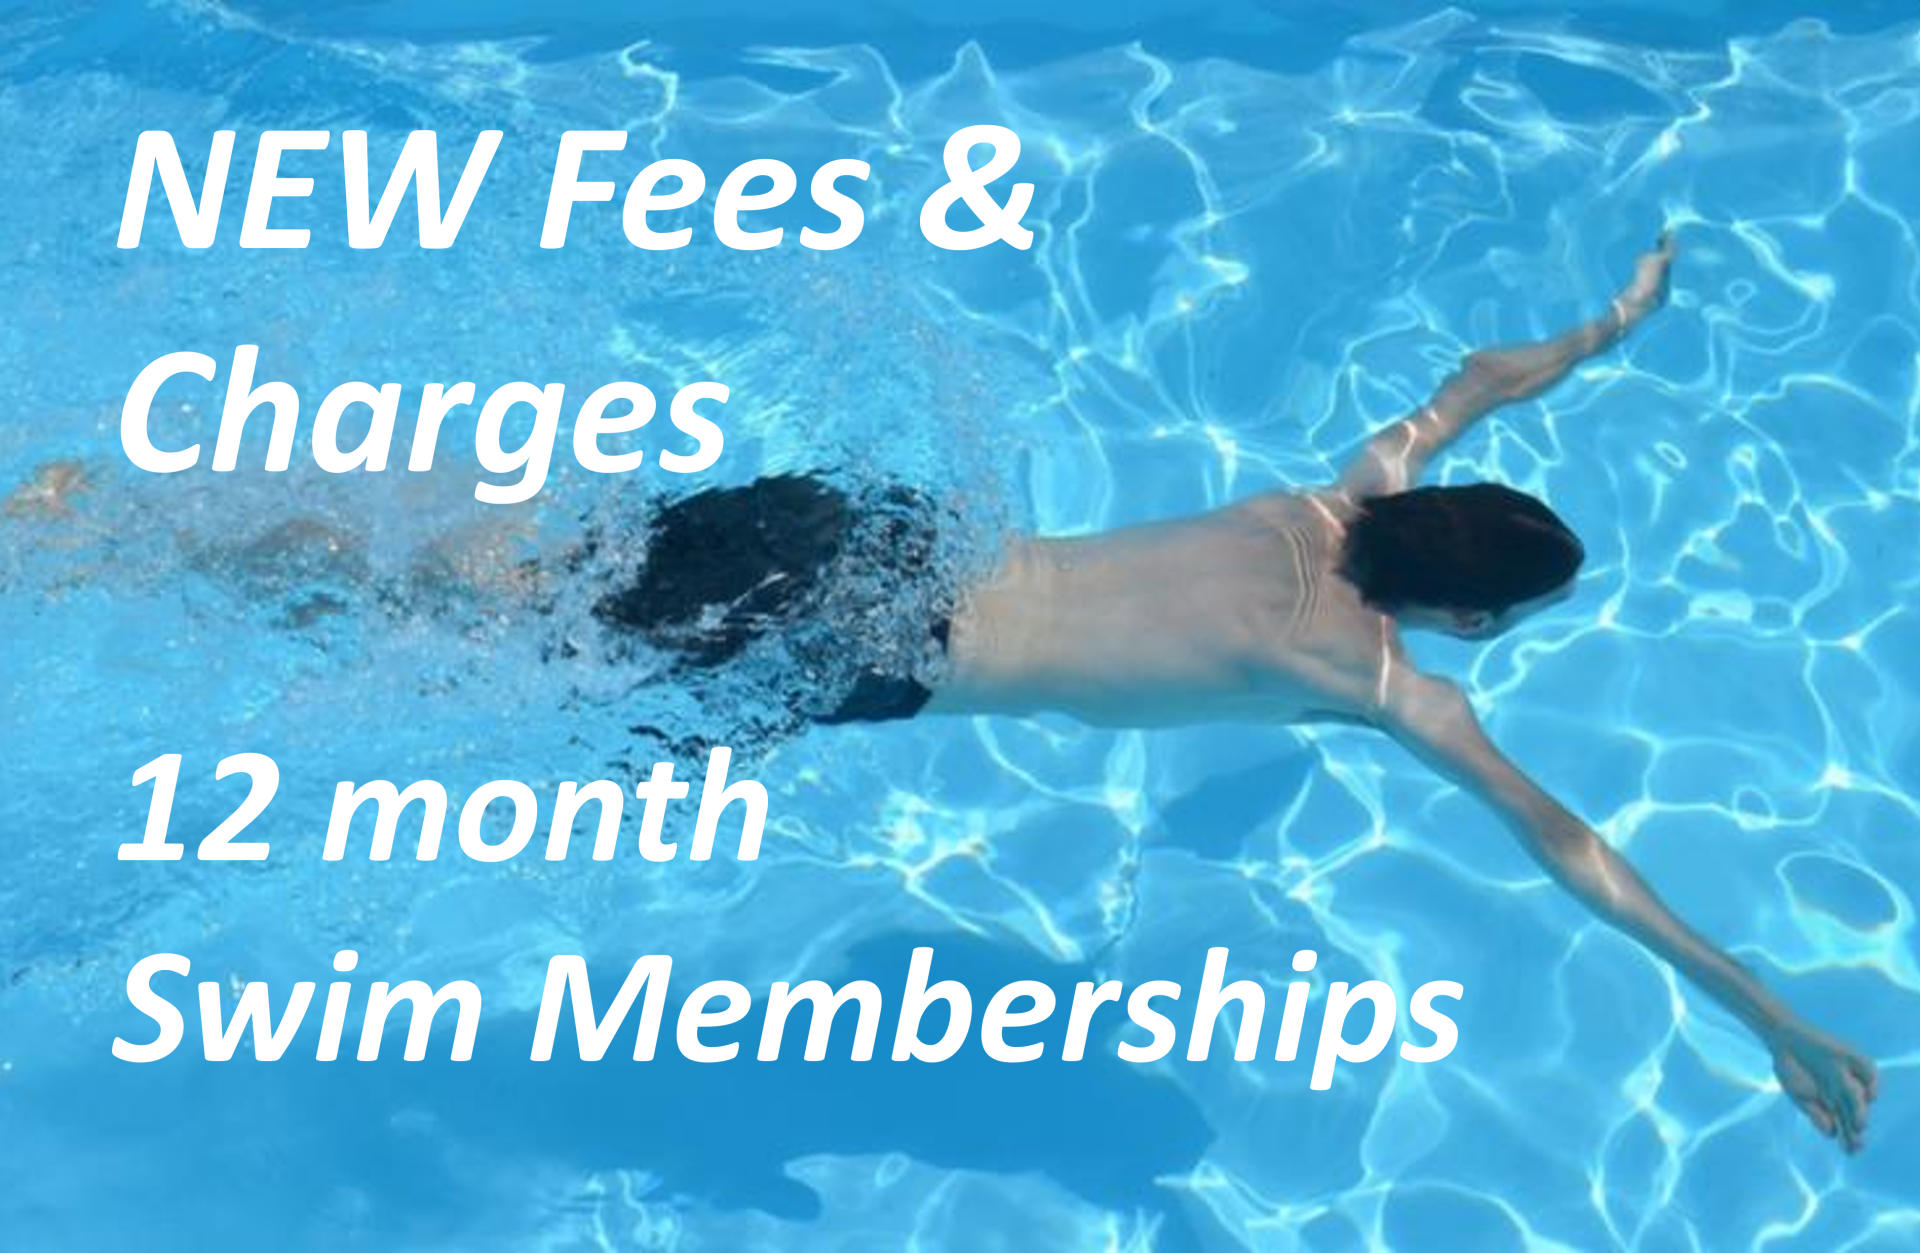 Amendment to 2023/23 Fees and Charges - Addition of 12-month Swim